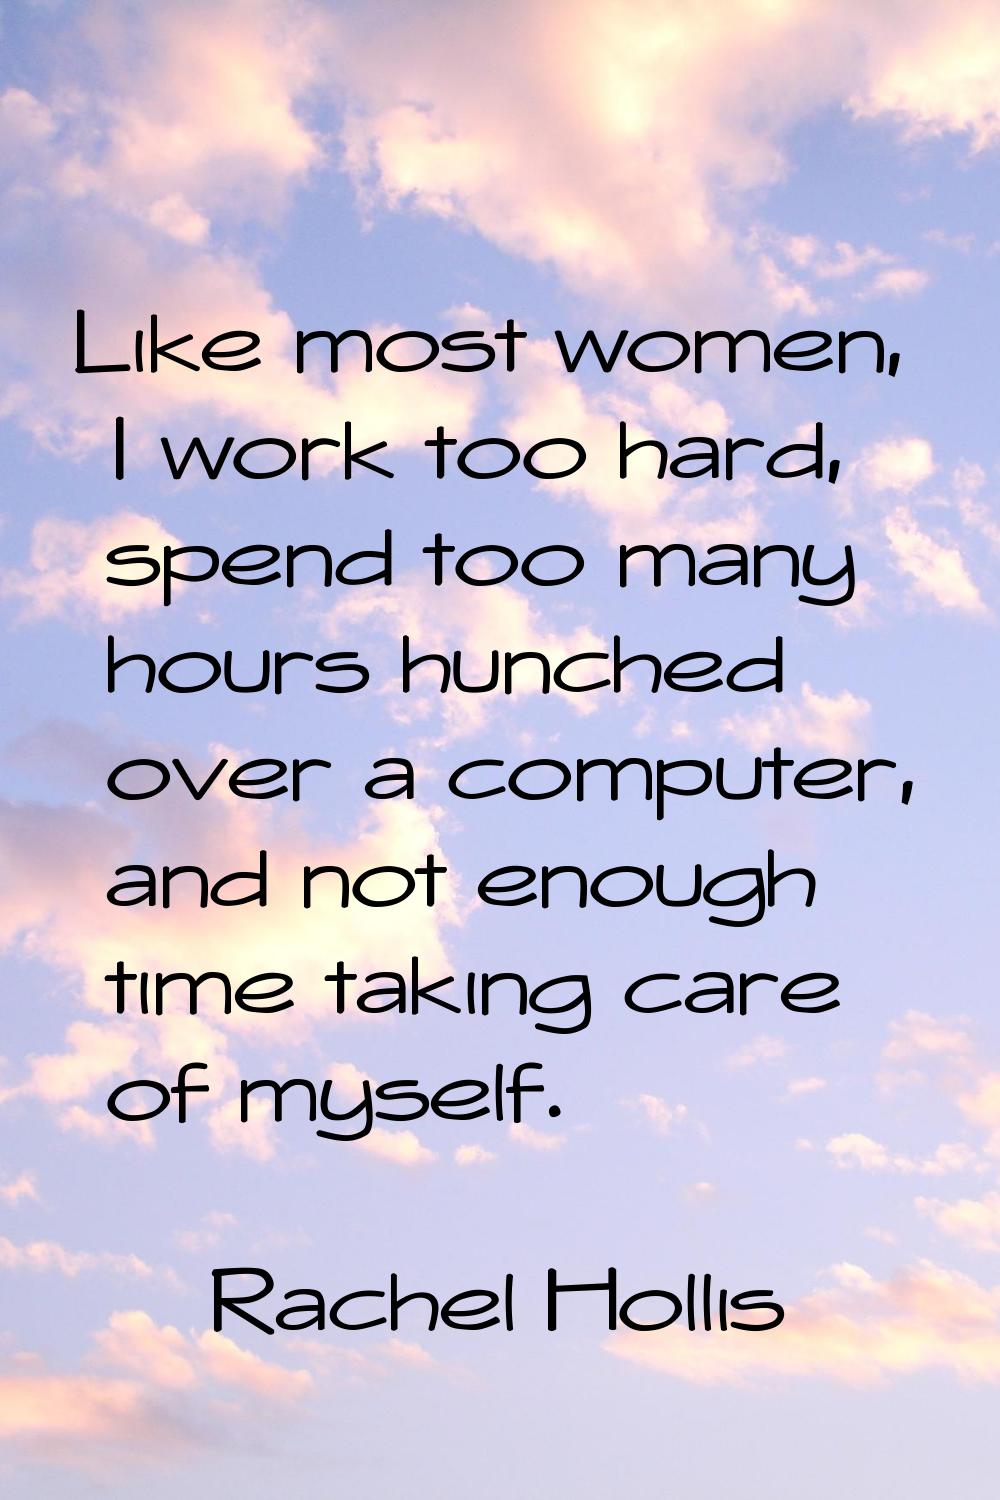 Like most women, I work too hard, spend too many hours hunched over a computer, and not enough time